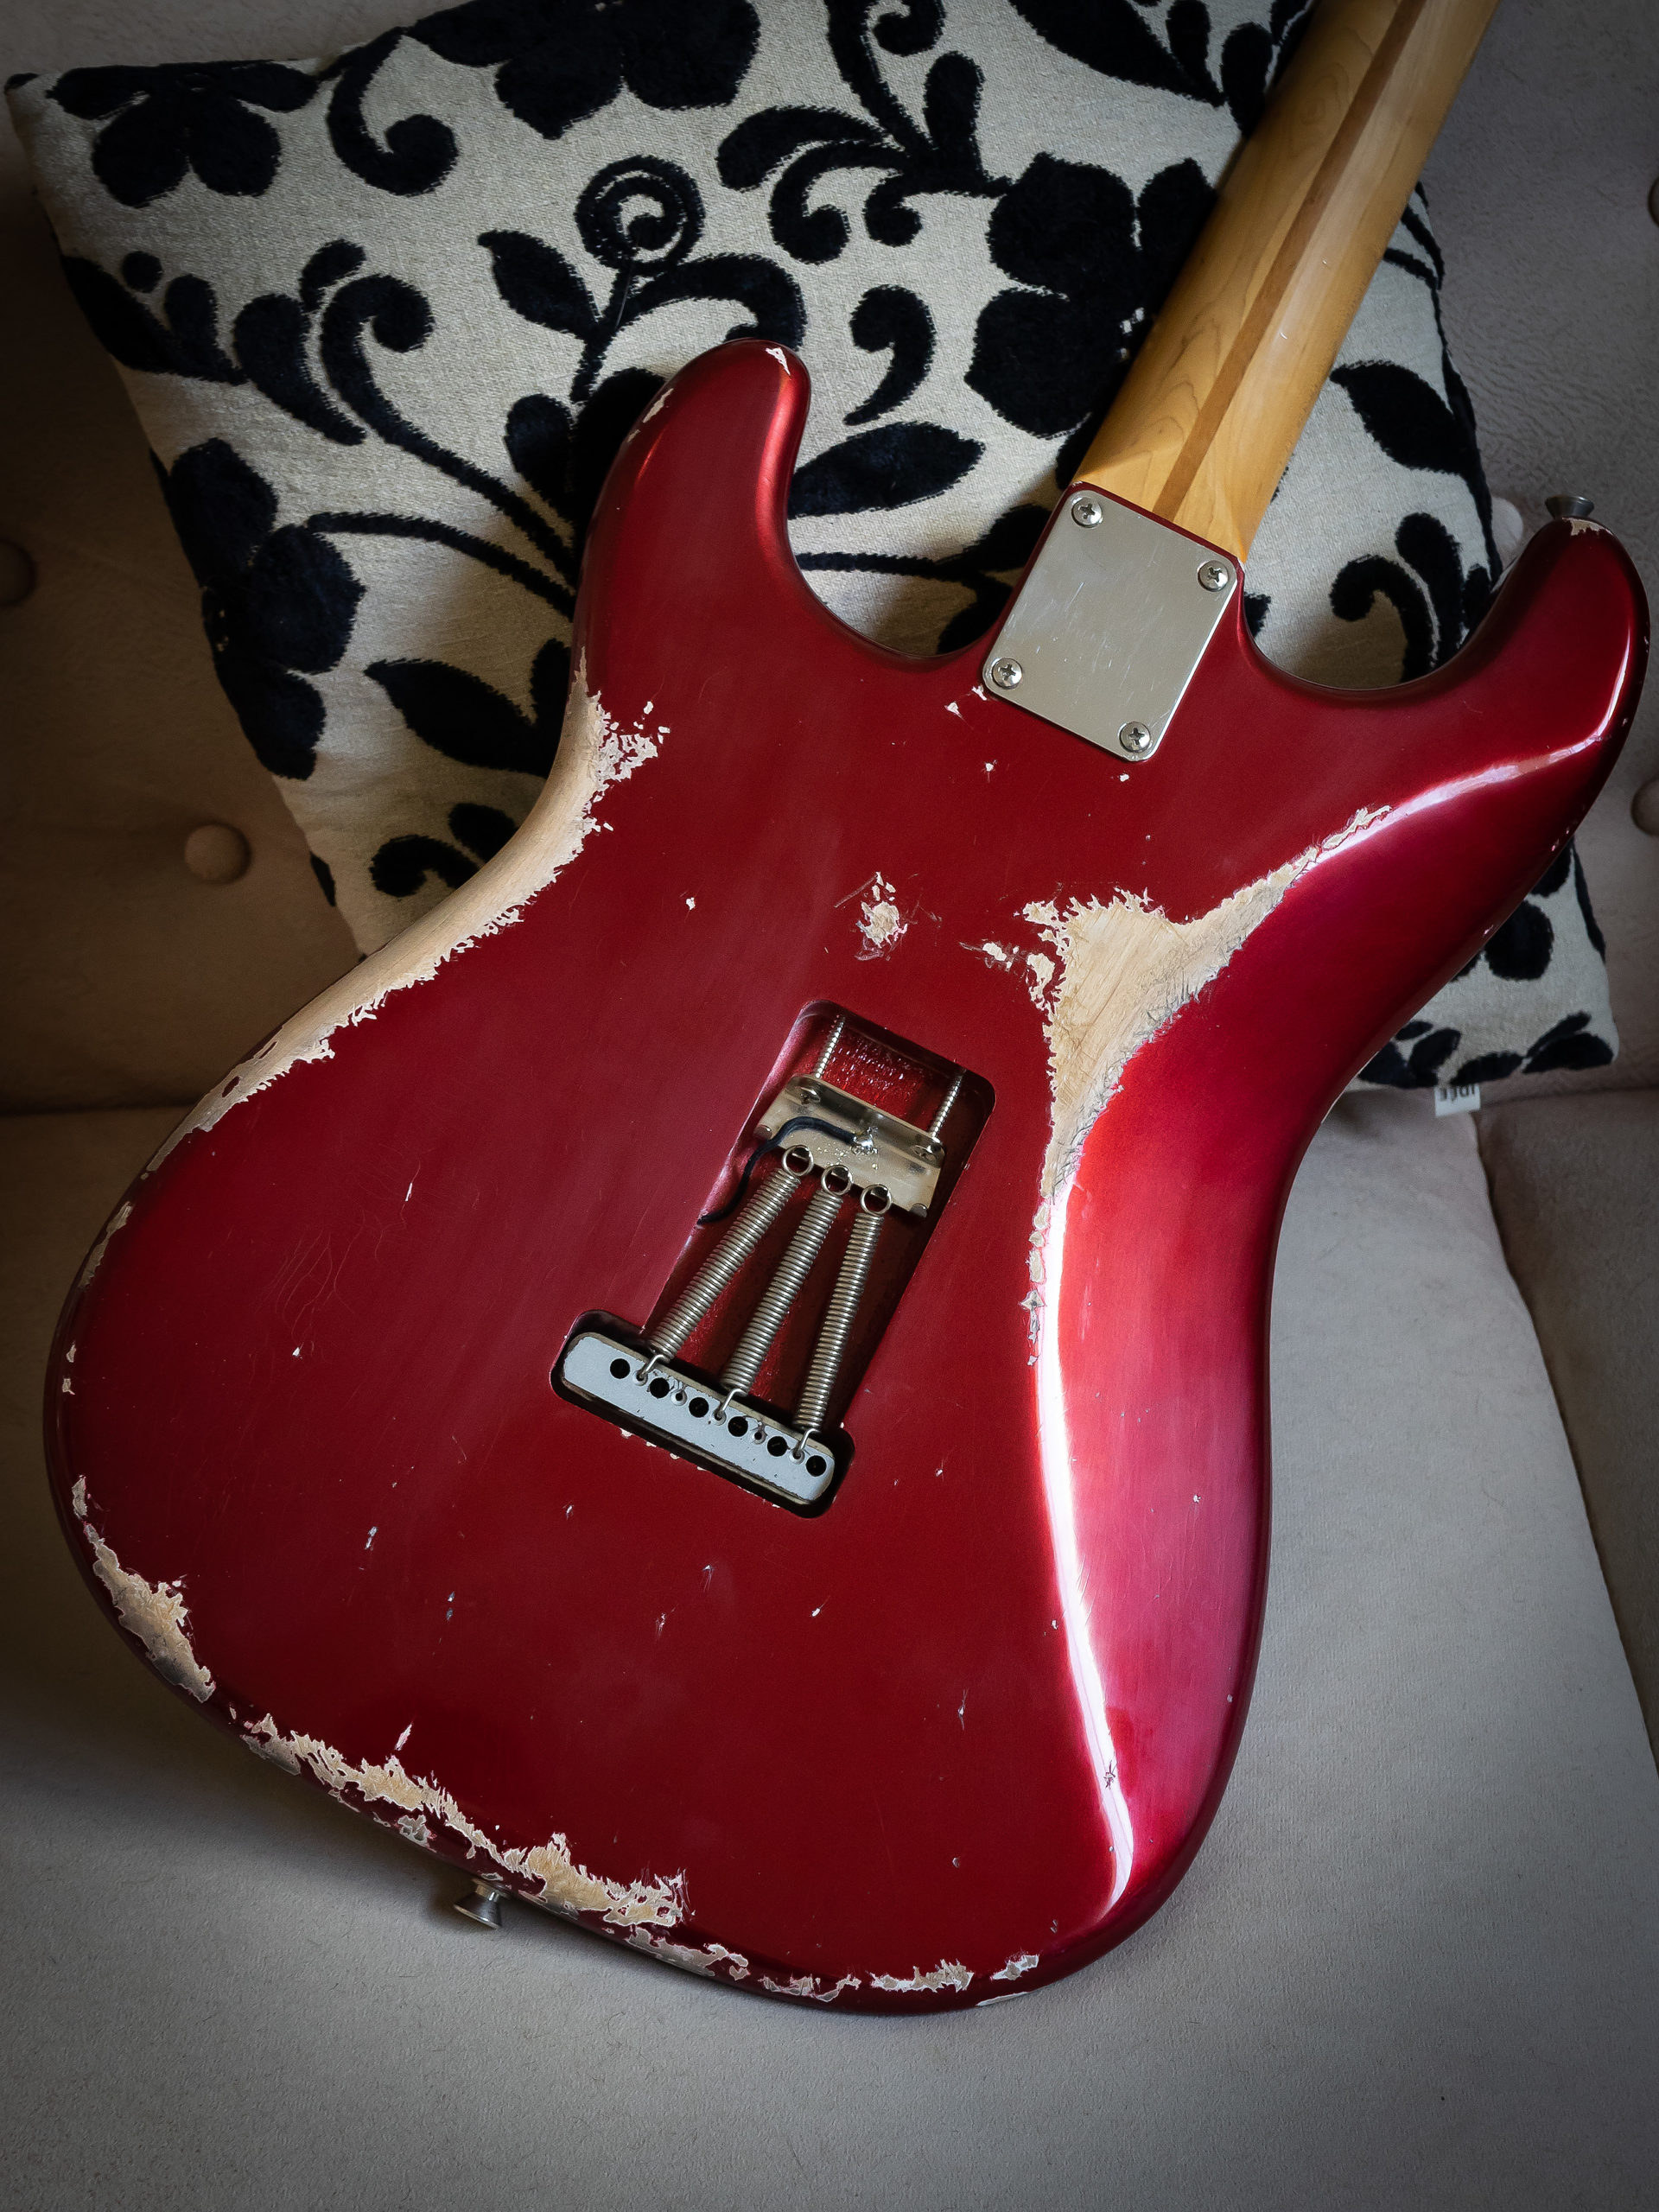 Fender Mexico Stratocaster Jimmy Vaughan MJT candy apple red relic 1956 Custom '54 pickup Custom shop